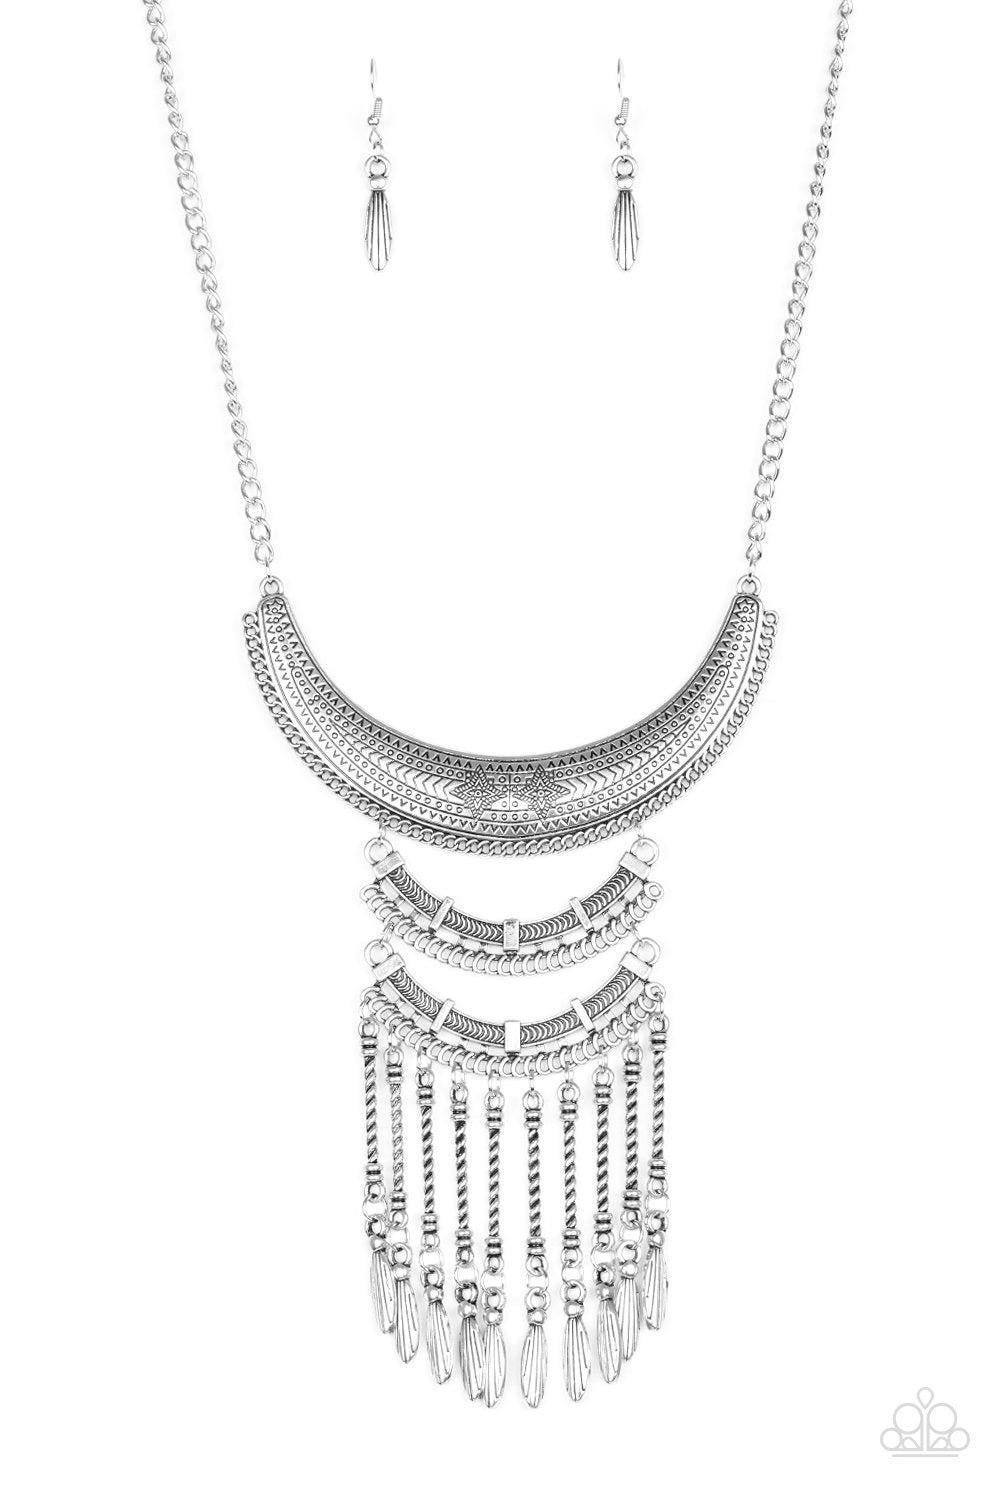 Eastern Empress Silver Fringe Necklace - Paparazzi Accessories-CarasShop.com - $5 Jewelry by Cara Jewels